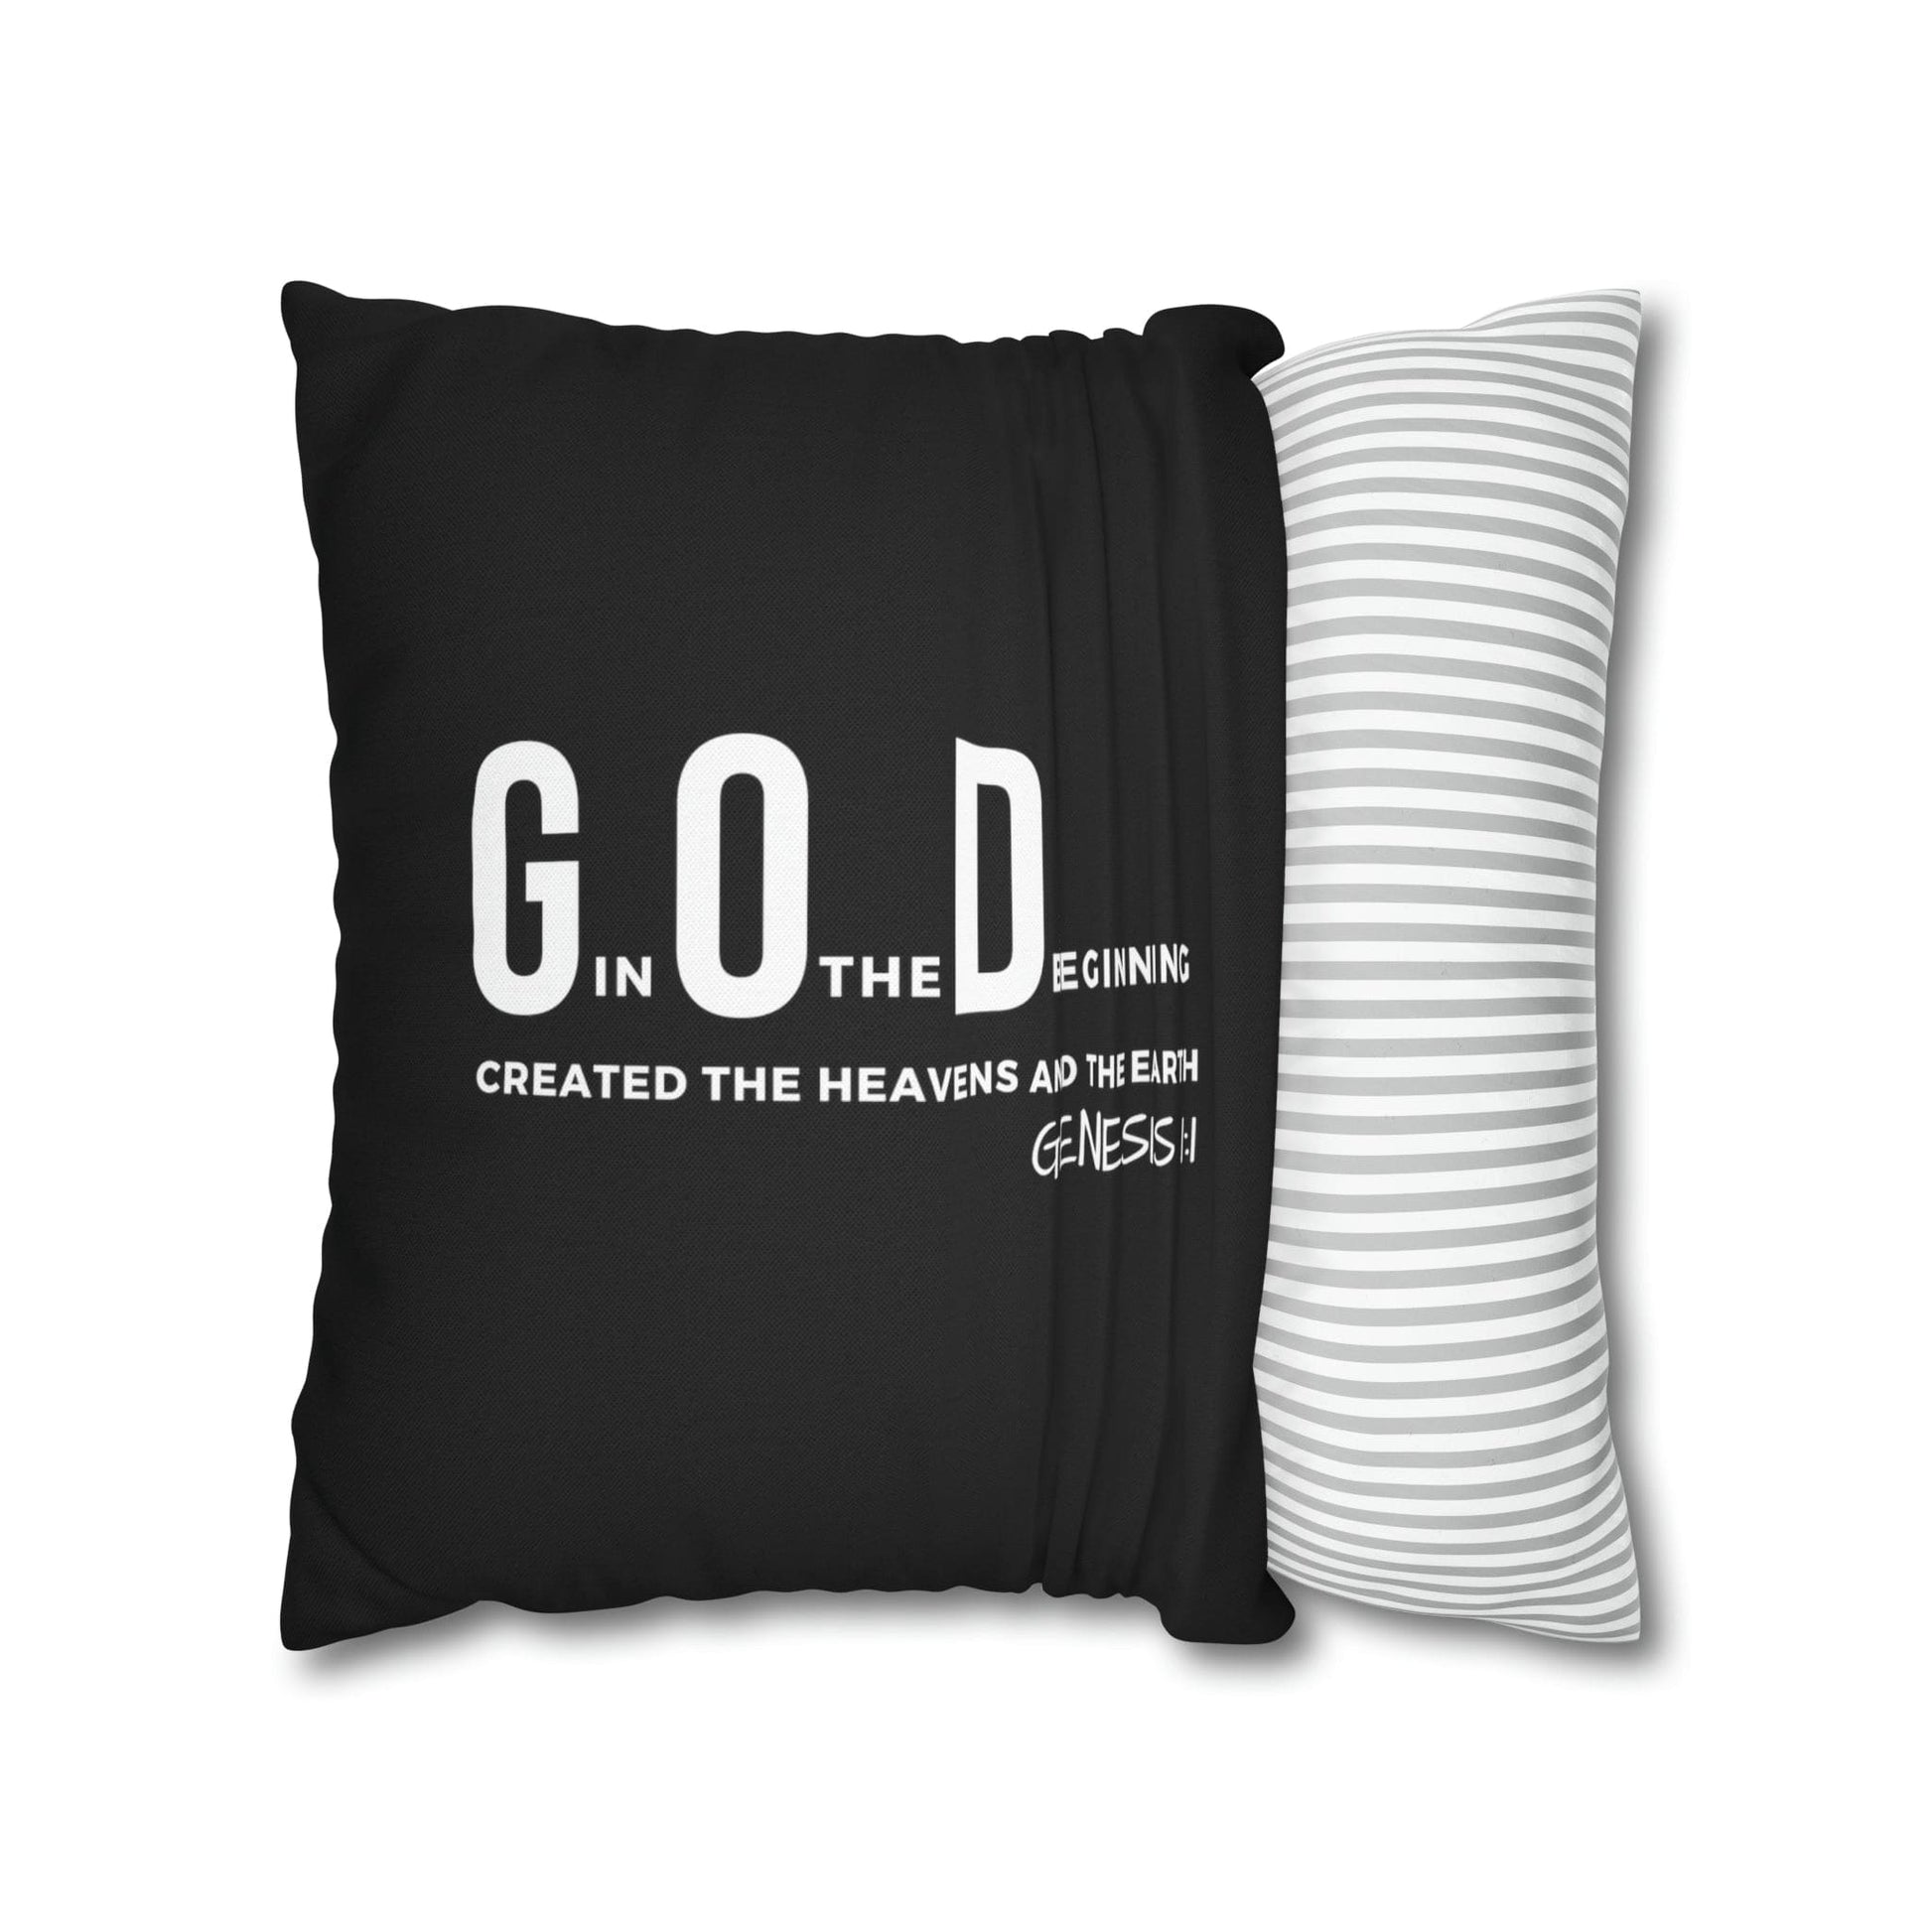 Decorative Throw Pillow Cover - Set Of 2, God In The Beginning Created The Heavens And The Earth - Scripture Verse-22